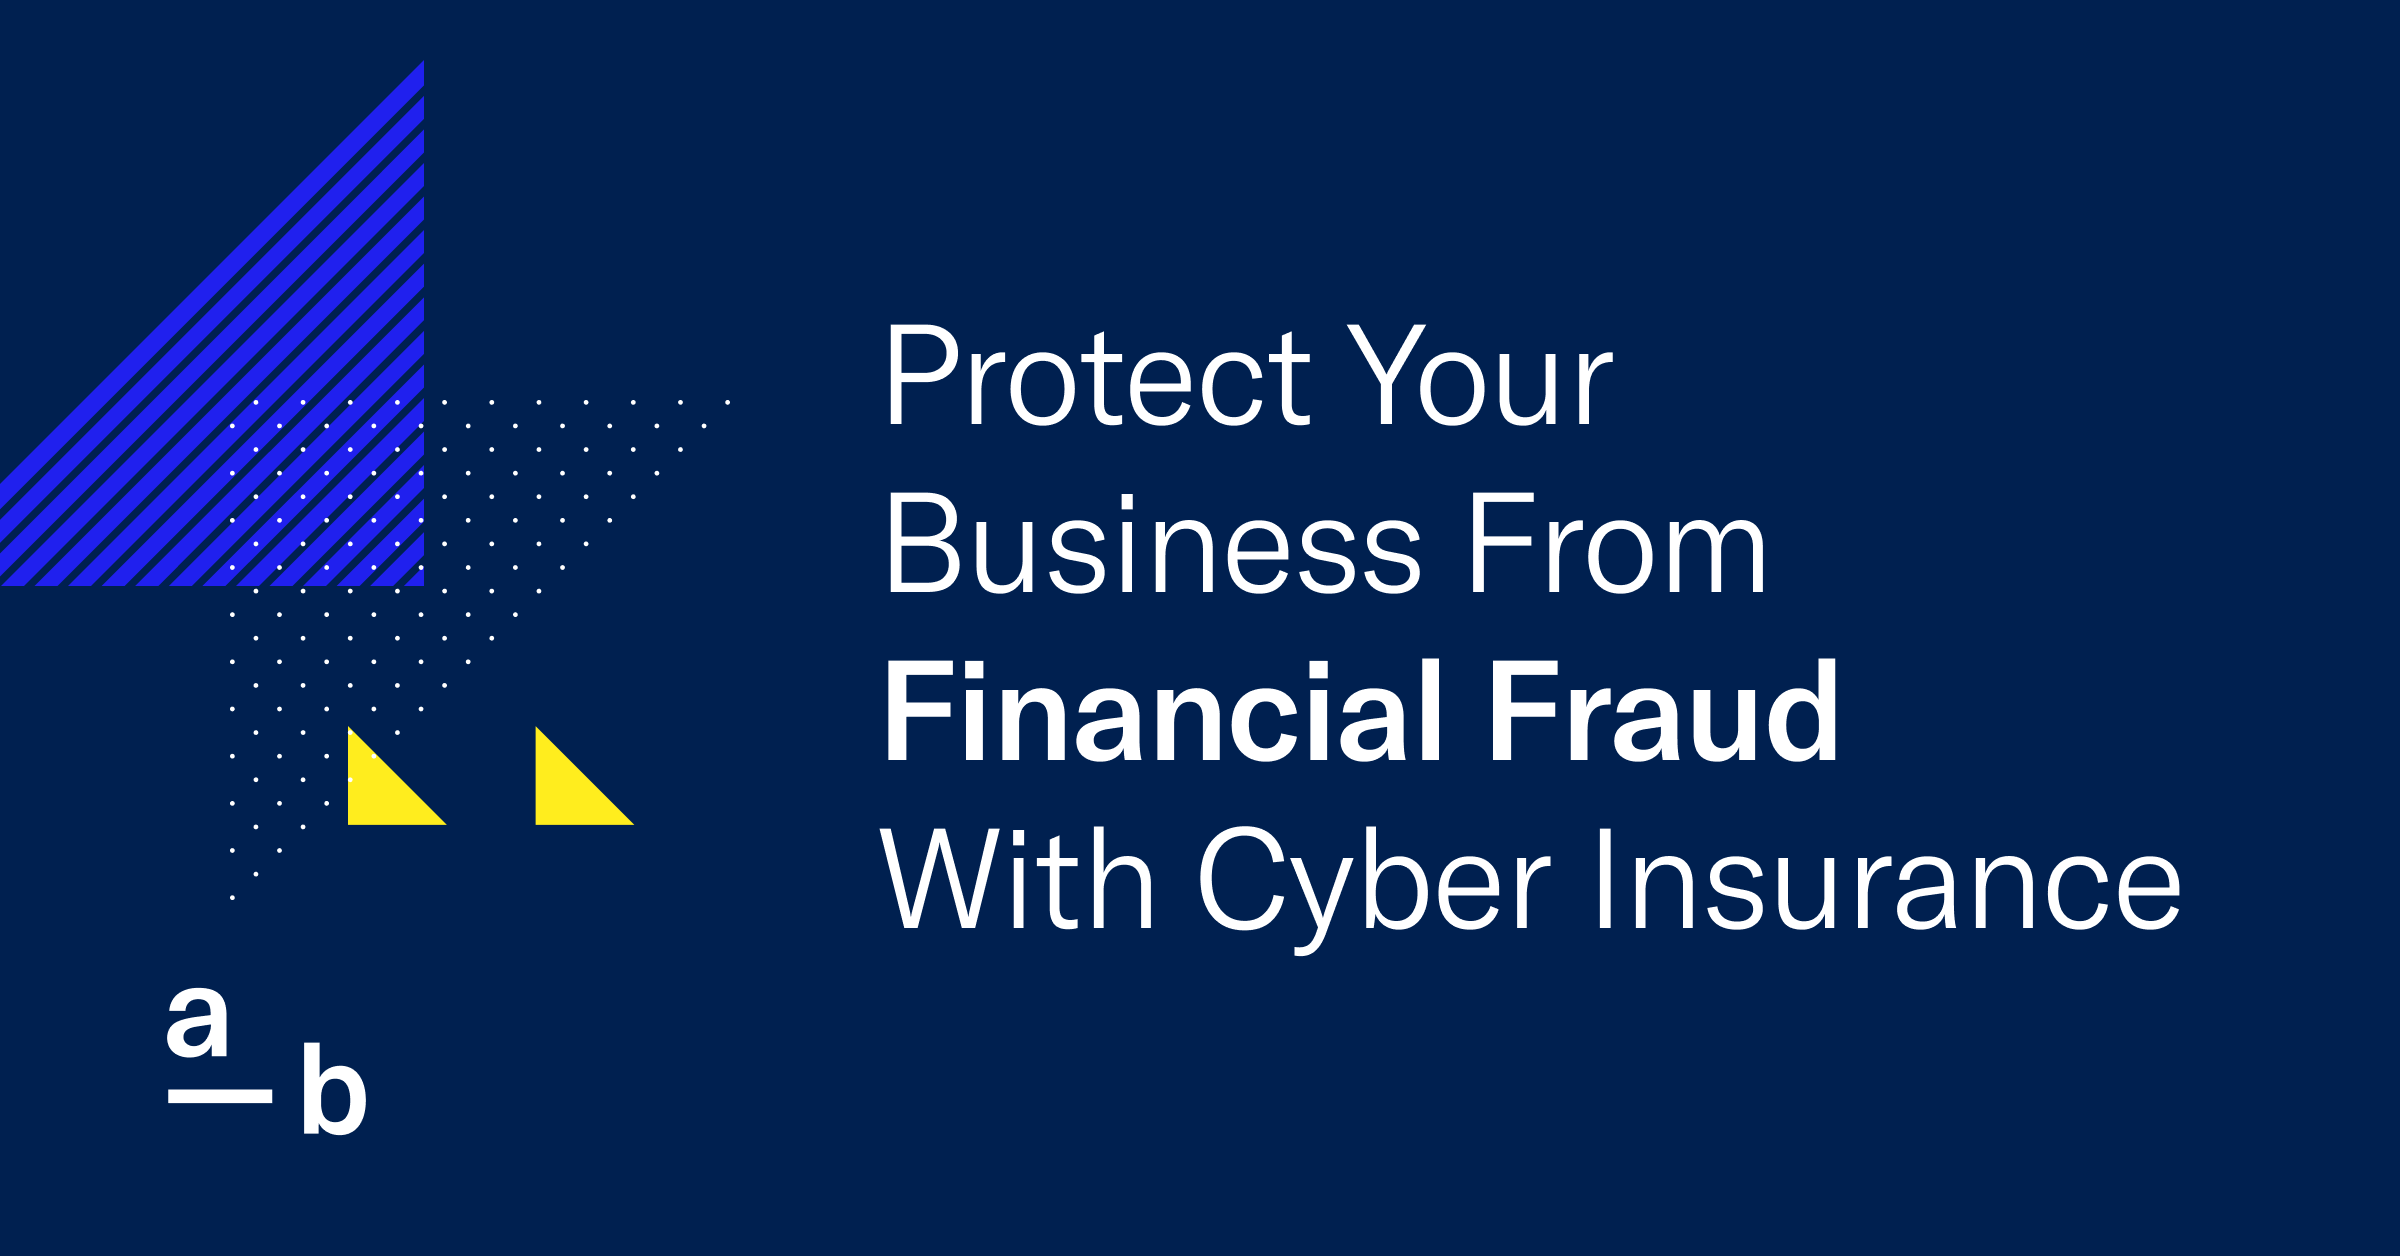 Protect Your Business From Financial Fraud With Cyber Insurance